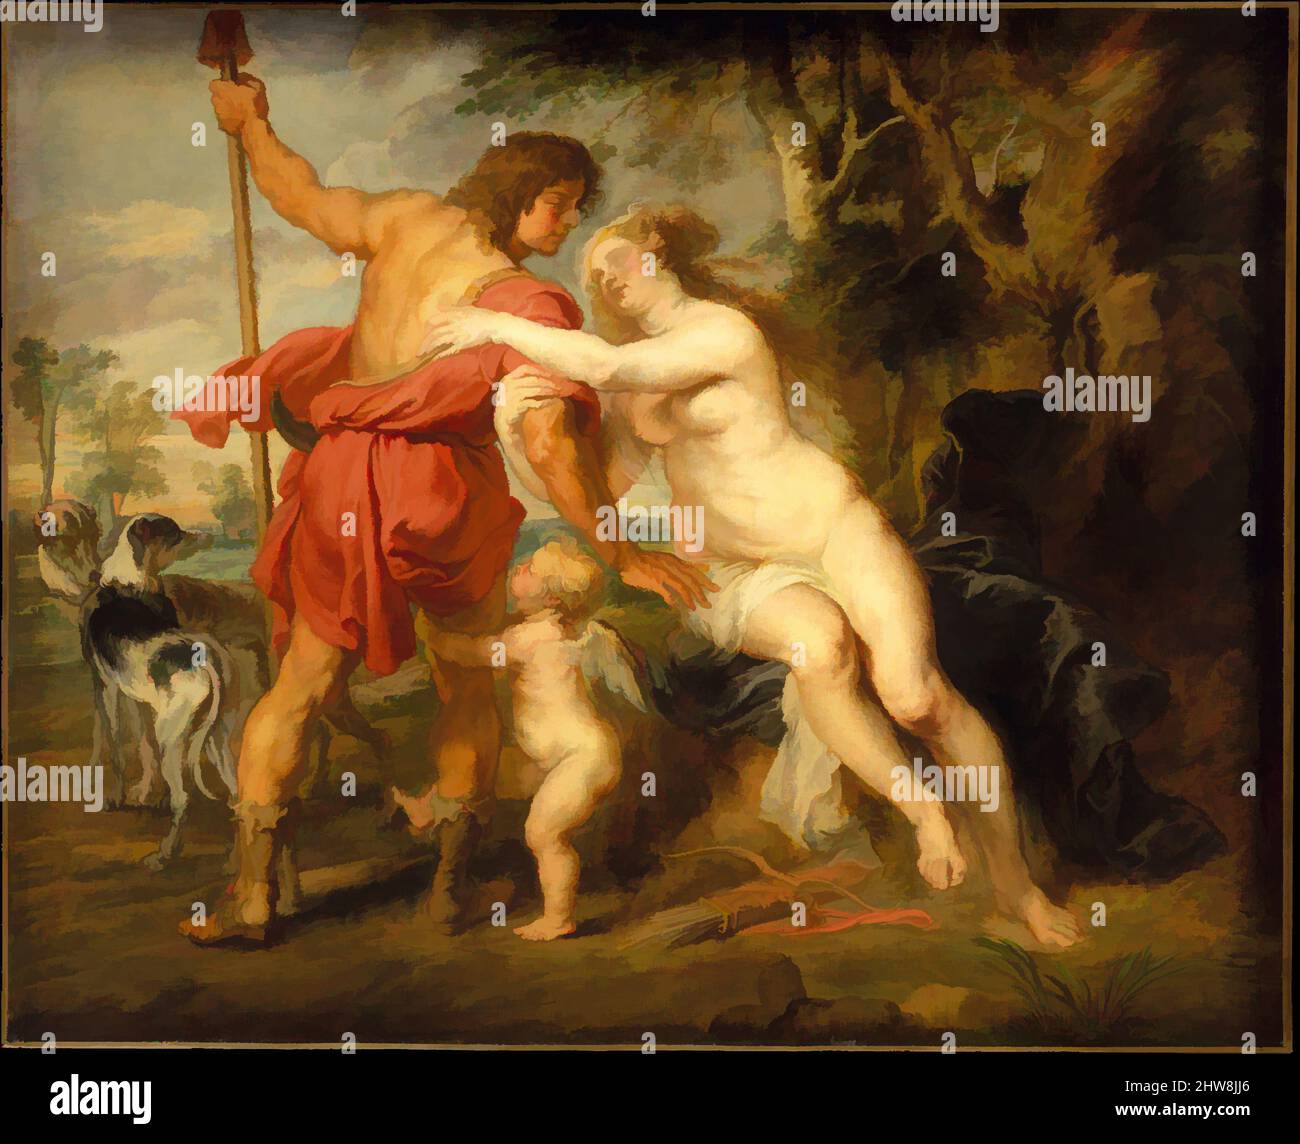 Art inspired by Venus and Adonis, probably mid-1630s, Oil on canvas, With added strips, 77 3/4 x 95 5/8 in. (197.5 x 242.9 cm), Paintings, Peter Paul Rubens (Flemish, Siegen 1577–1640 Antwerp), The subject is from Ovid’s Metamorphoses (completed 8 A.D). Accidently pricked by one of, Classic works modernized by Artotop with a splash of modernity. Shapes, color and value, eye-catching visual impact on art. Emotions through freedom of artworks in a contemporary way. A timeless message pursuing a wildly creative new direction. Artists turning to the digital medium and creating the Artotop NFT Stock Photo